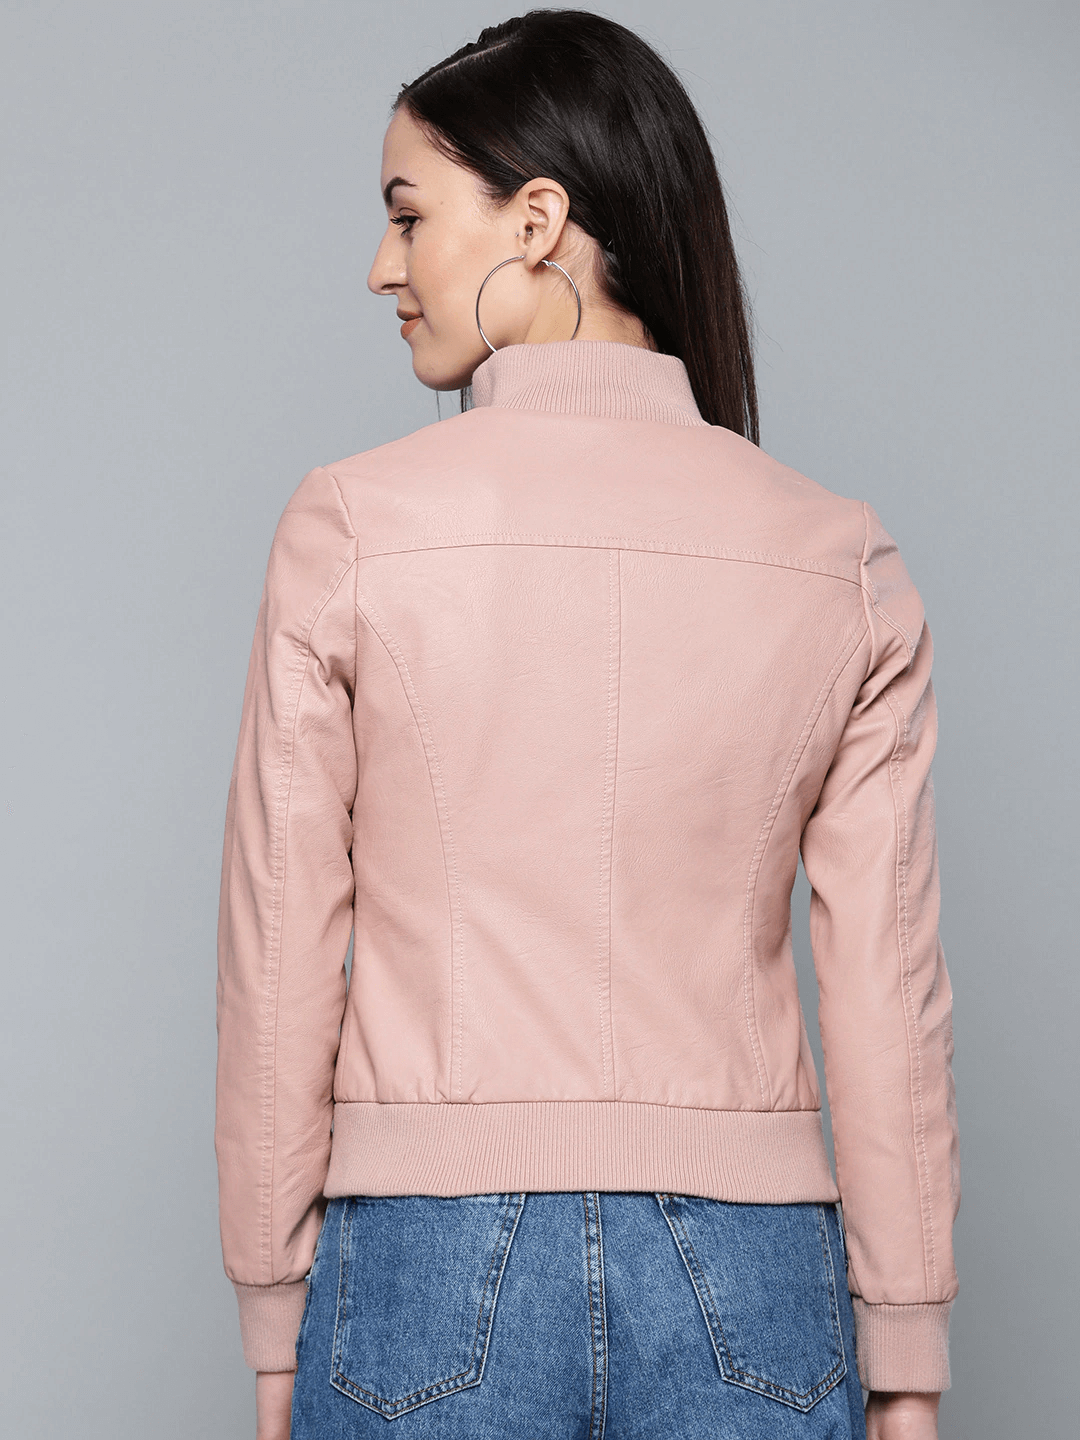 Sculpt Australia womens leather jacket Pink Solid Bomber Leather Jacket